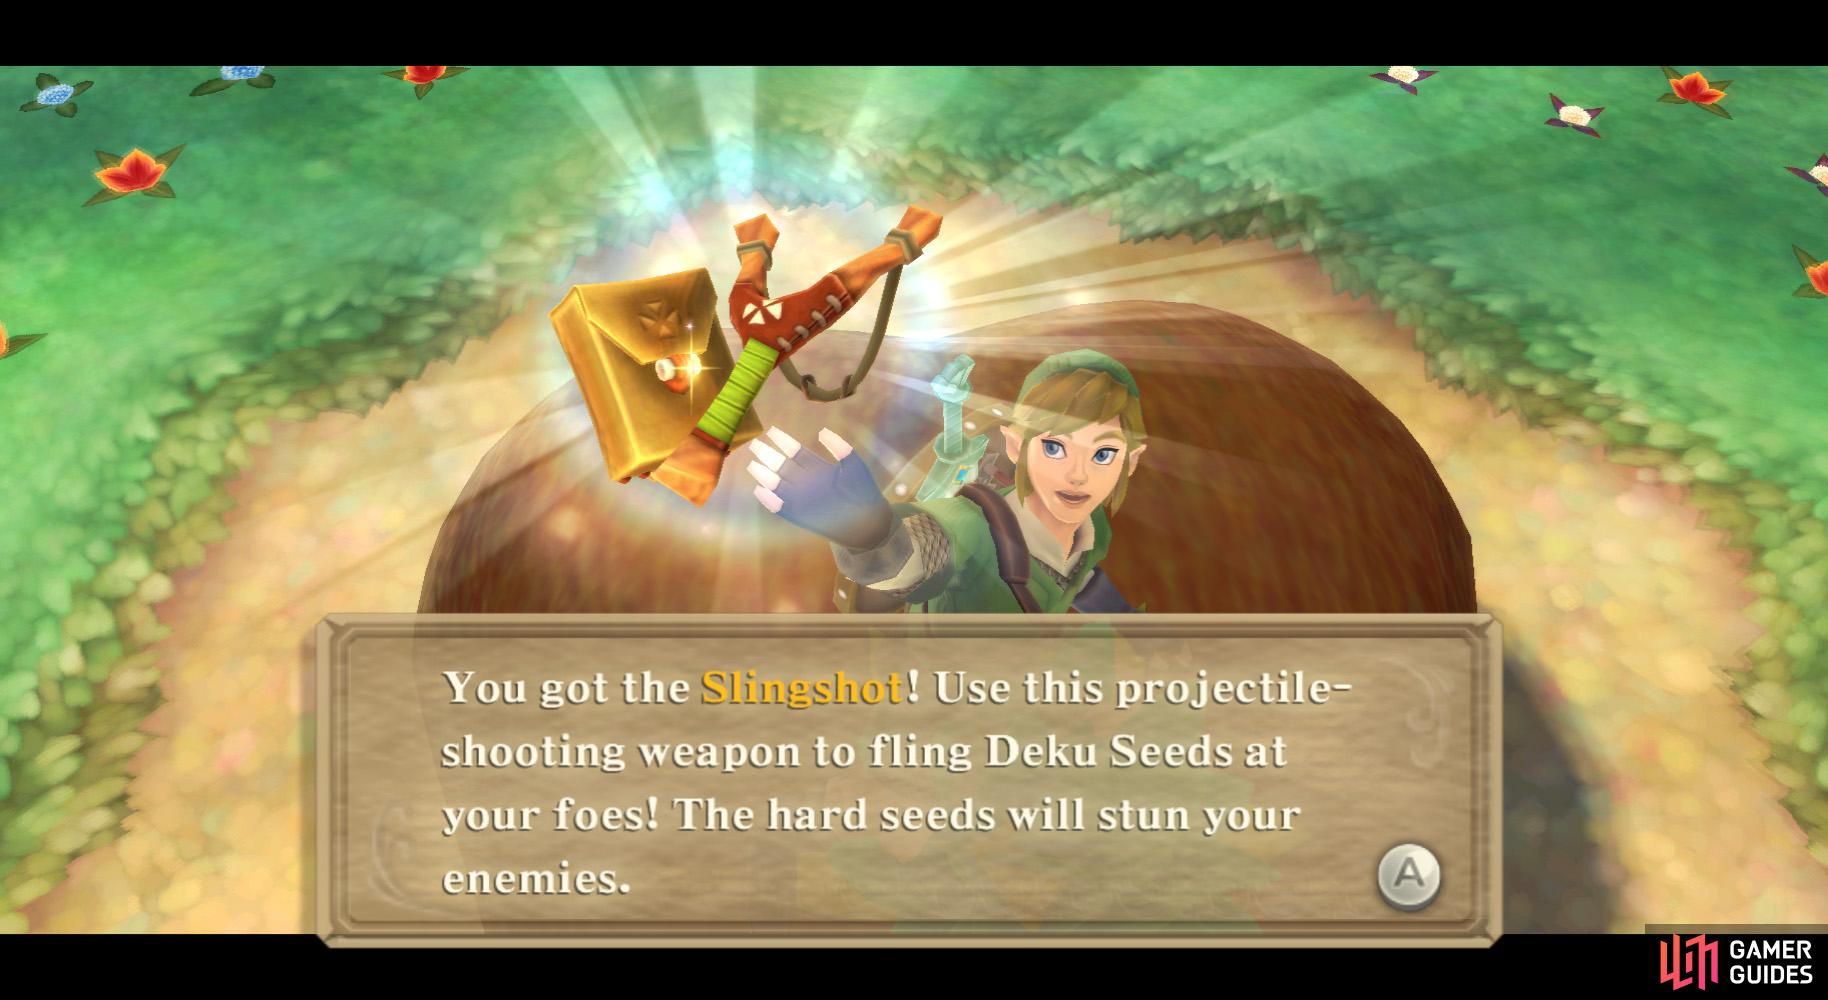 The Slingshot is gifted to Link after a day's hard work.